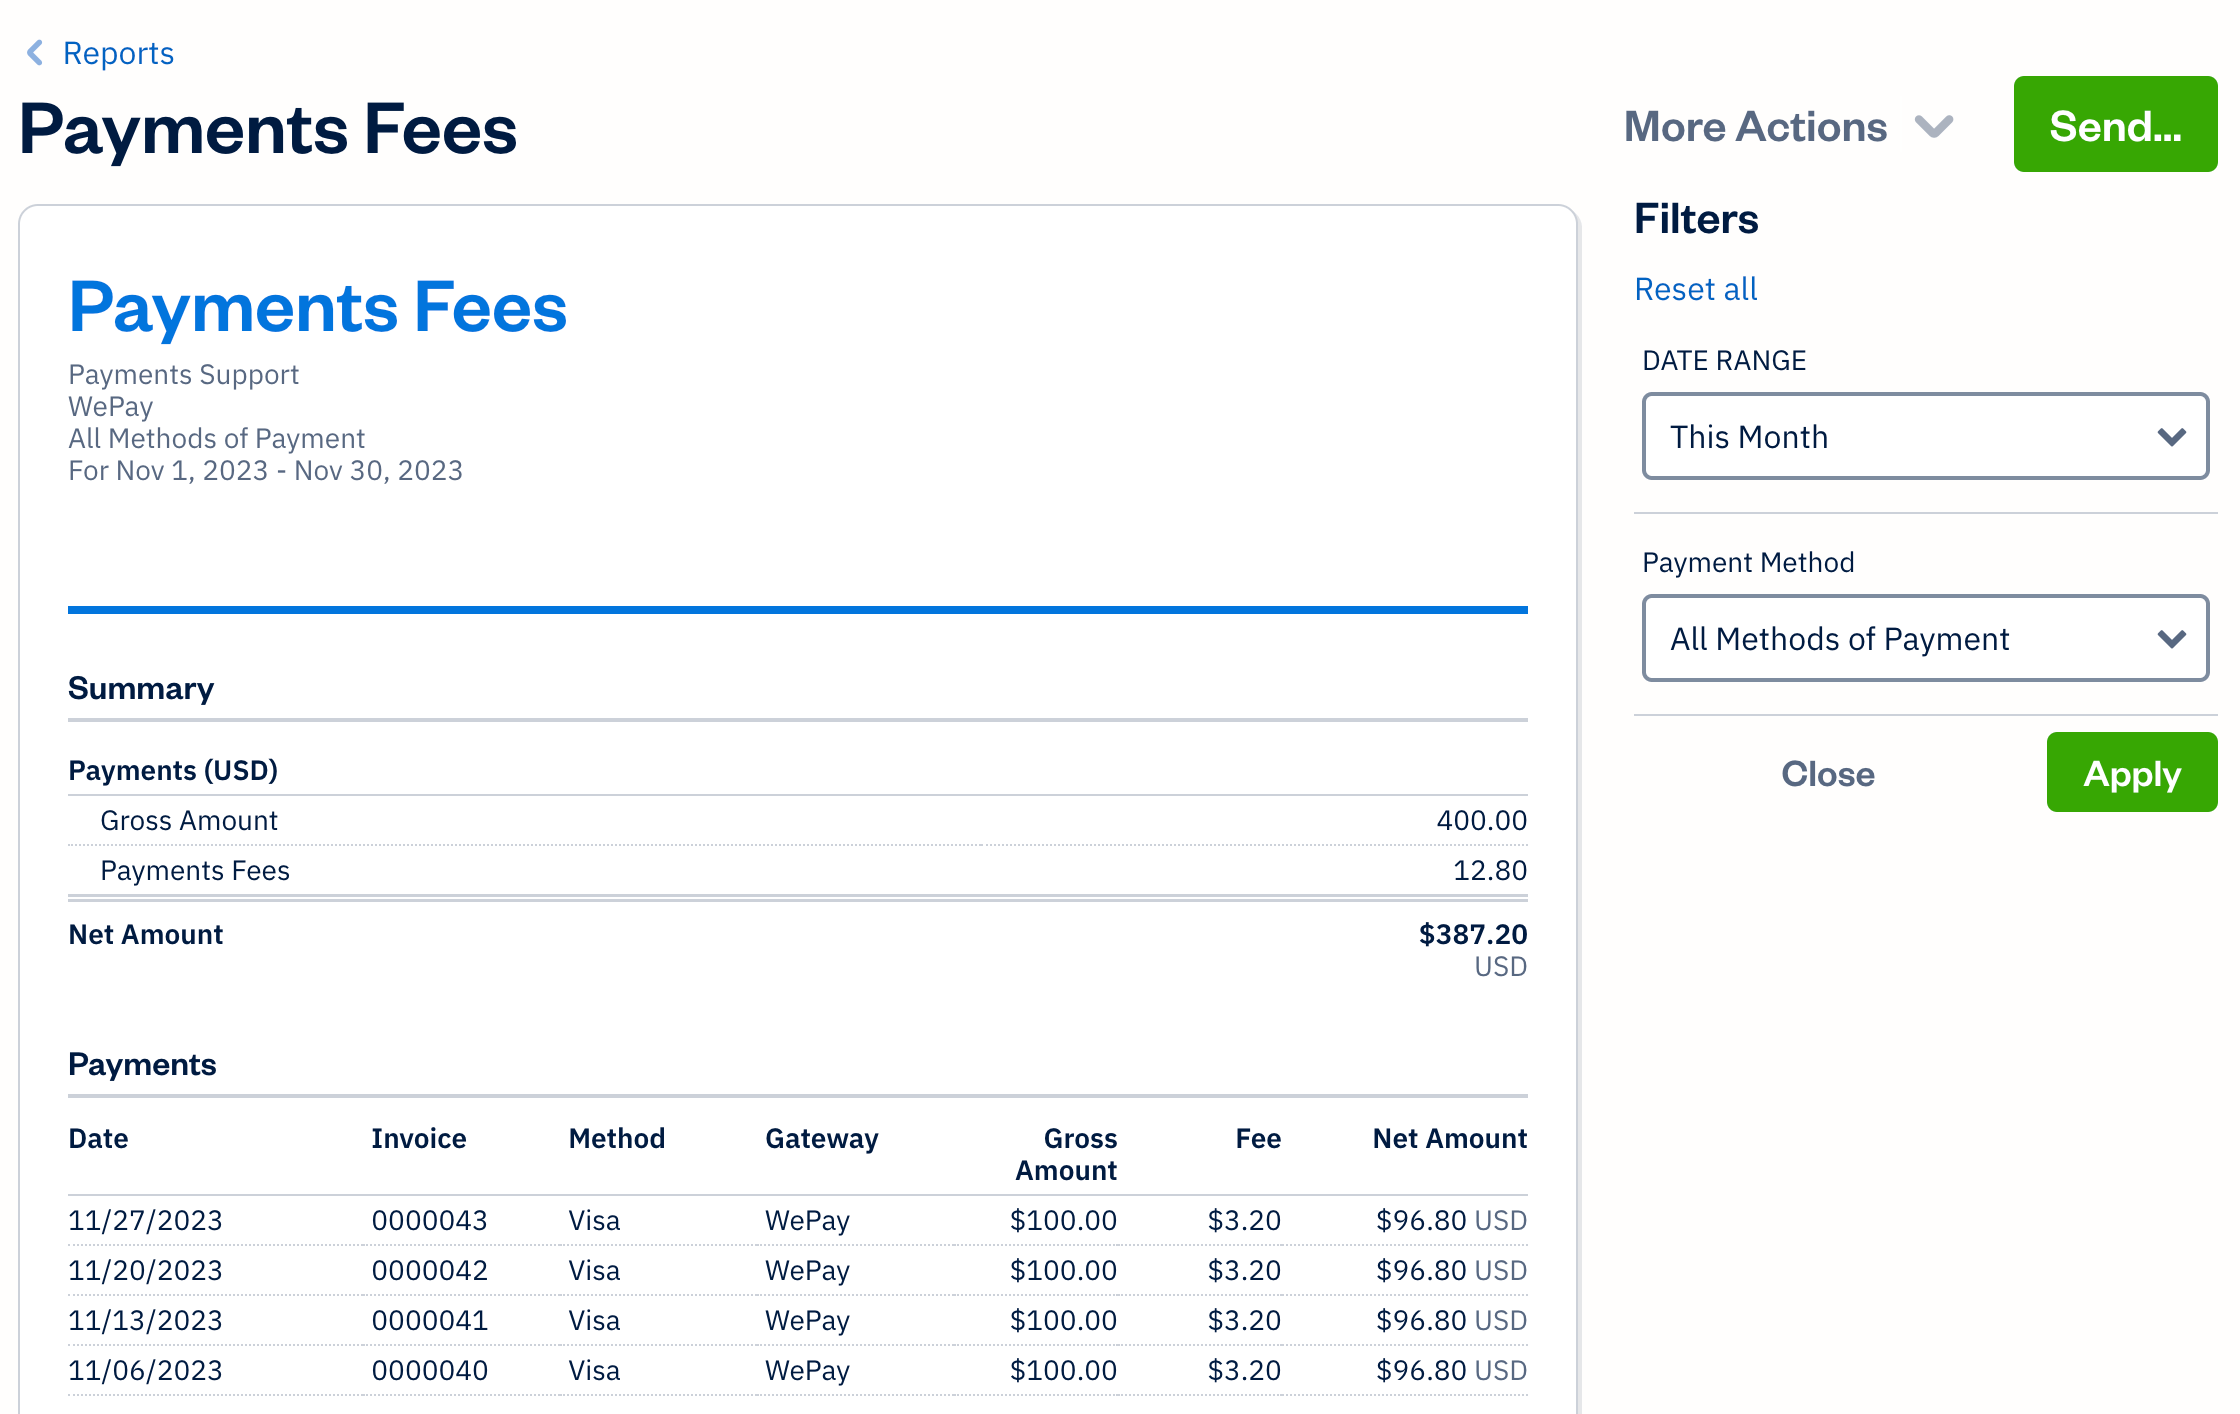 Payment fees report showing all payments with details and filters on the right side.